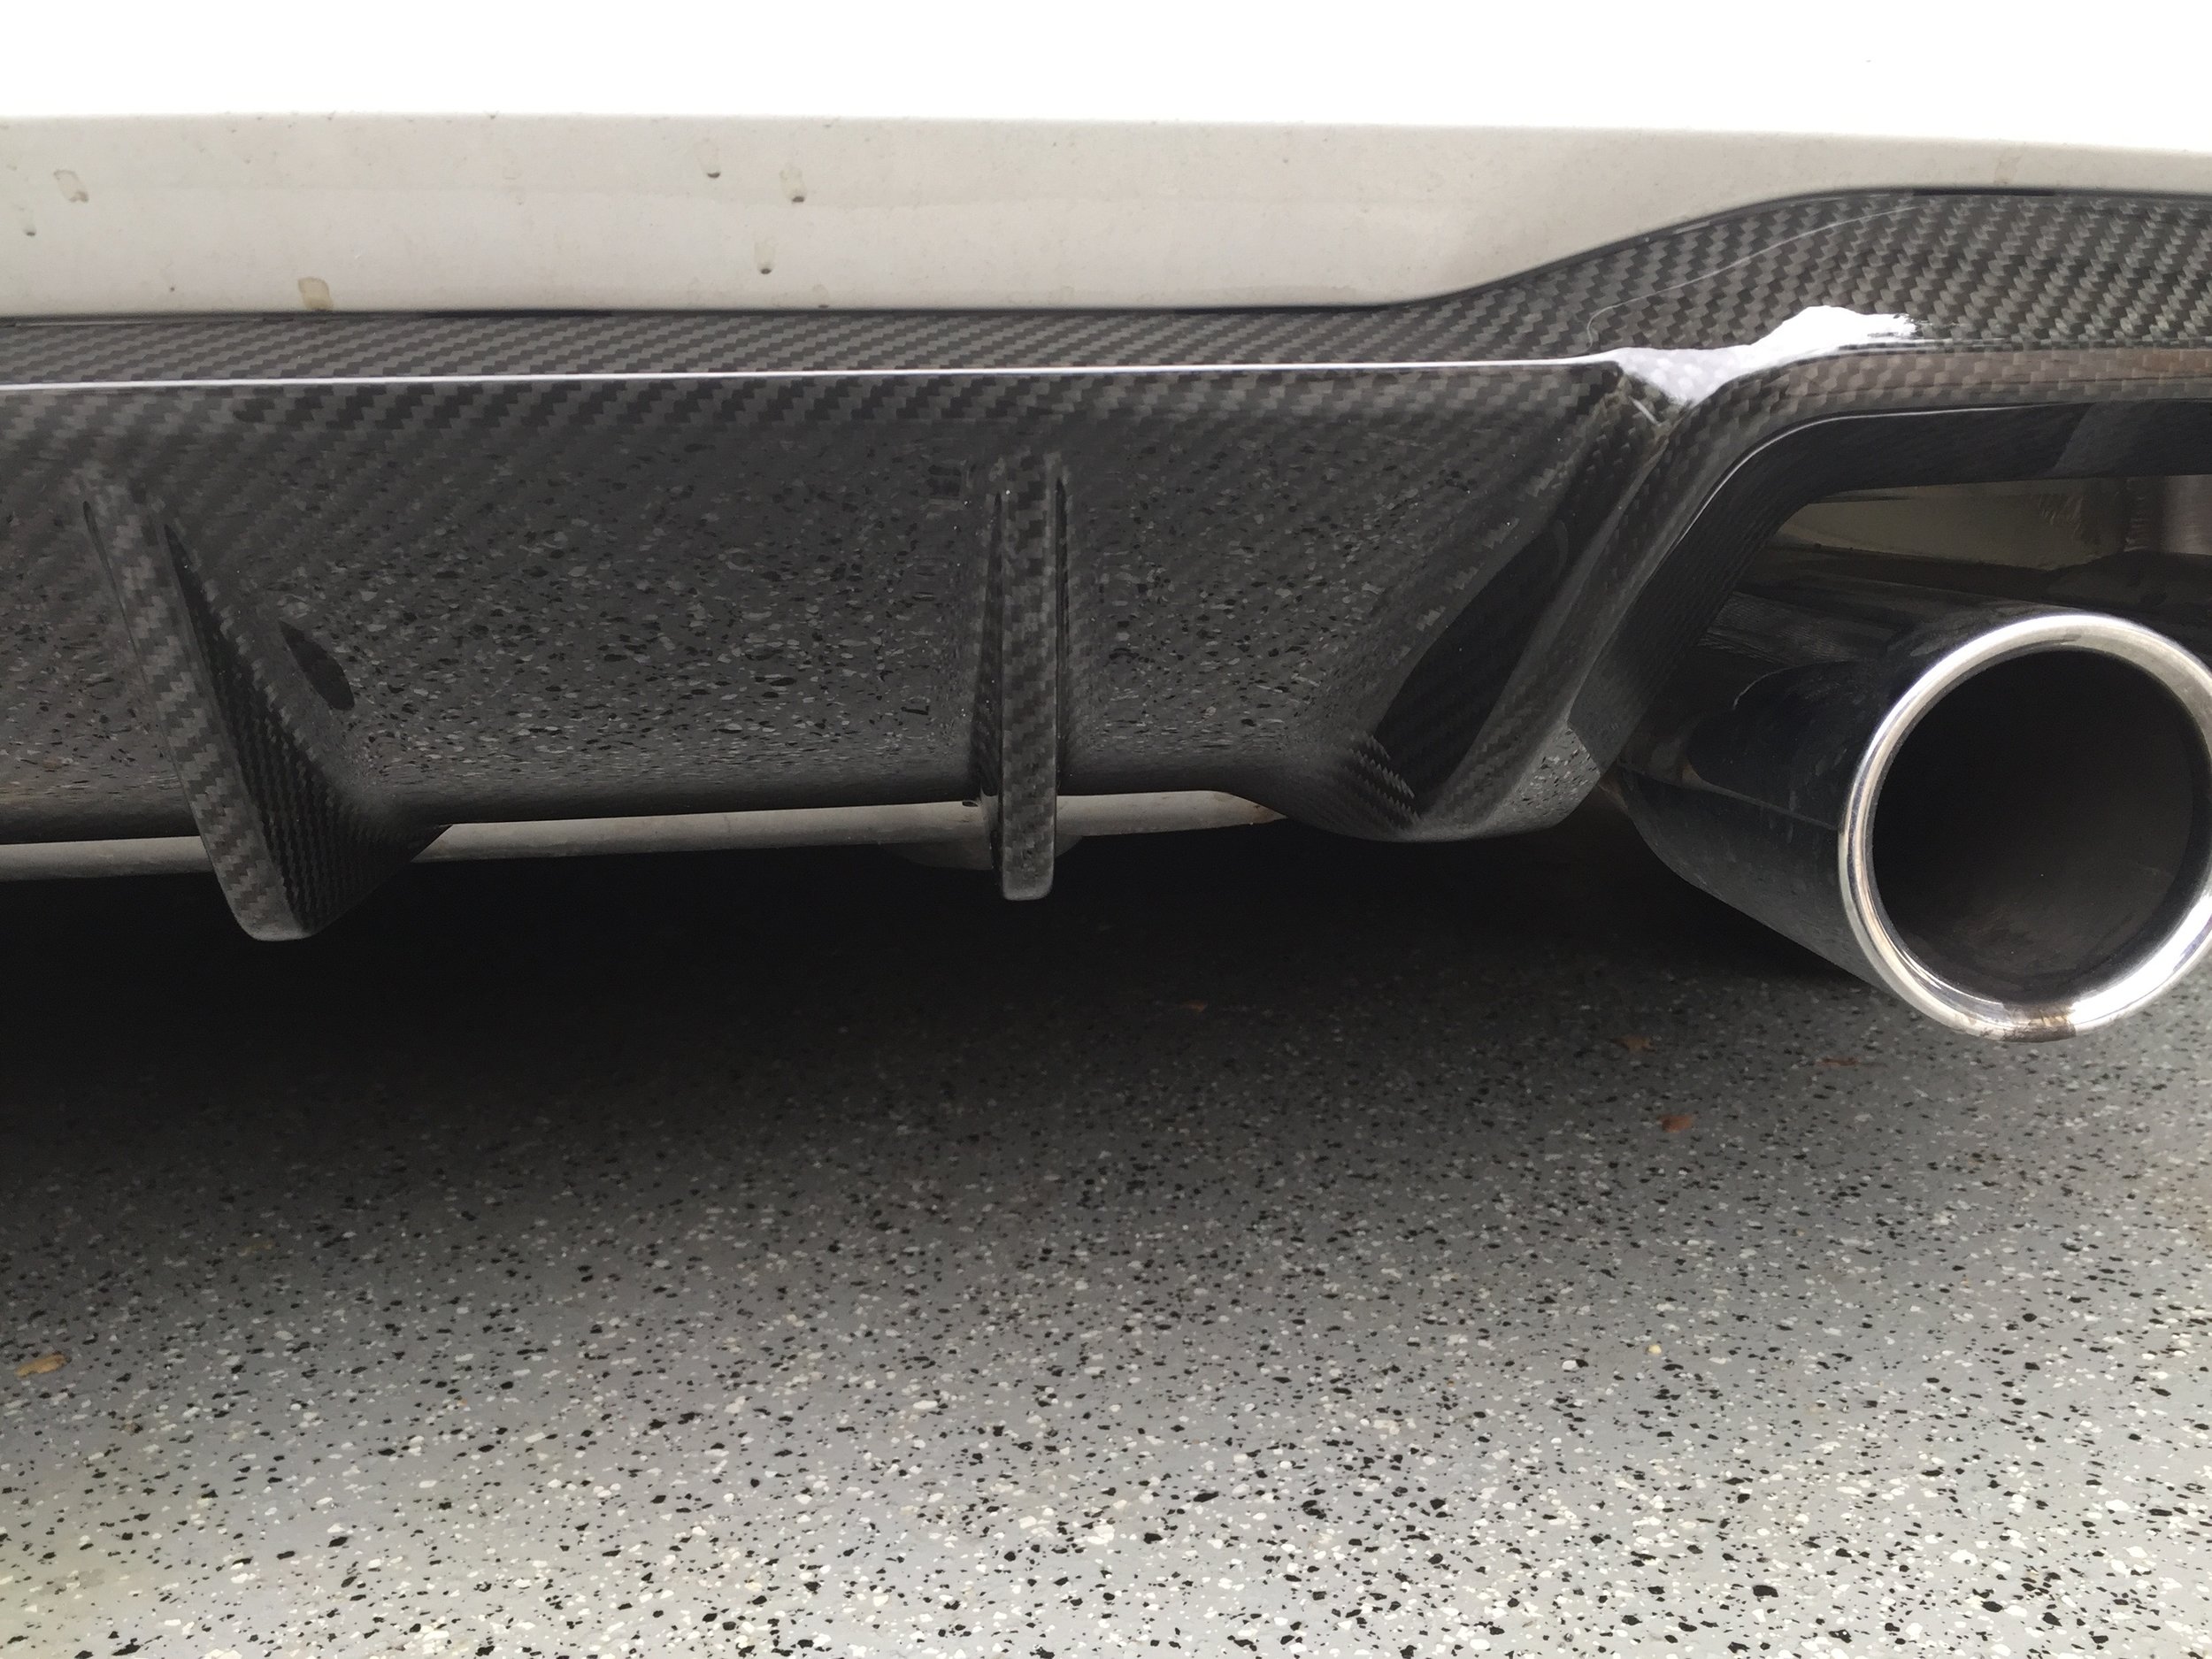 M Performance rear diffuser - up close